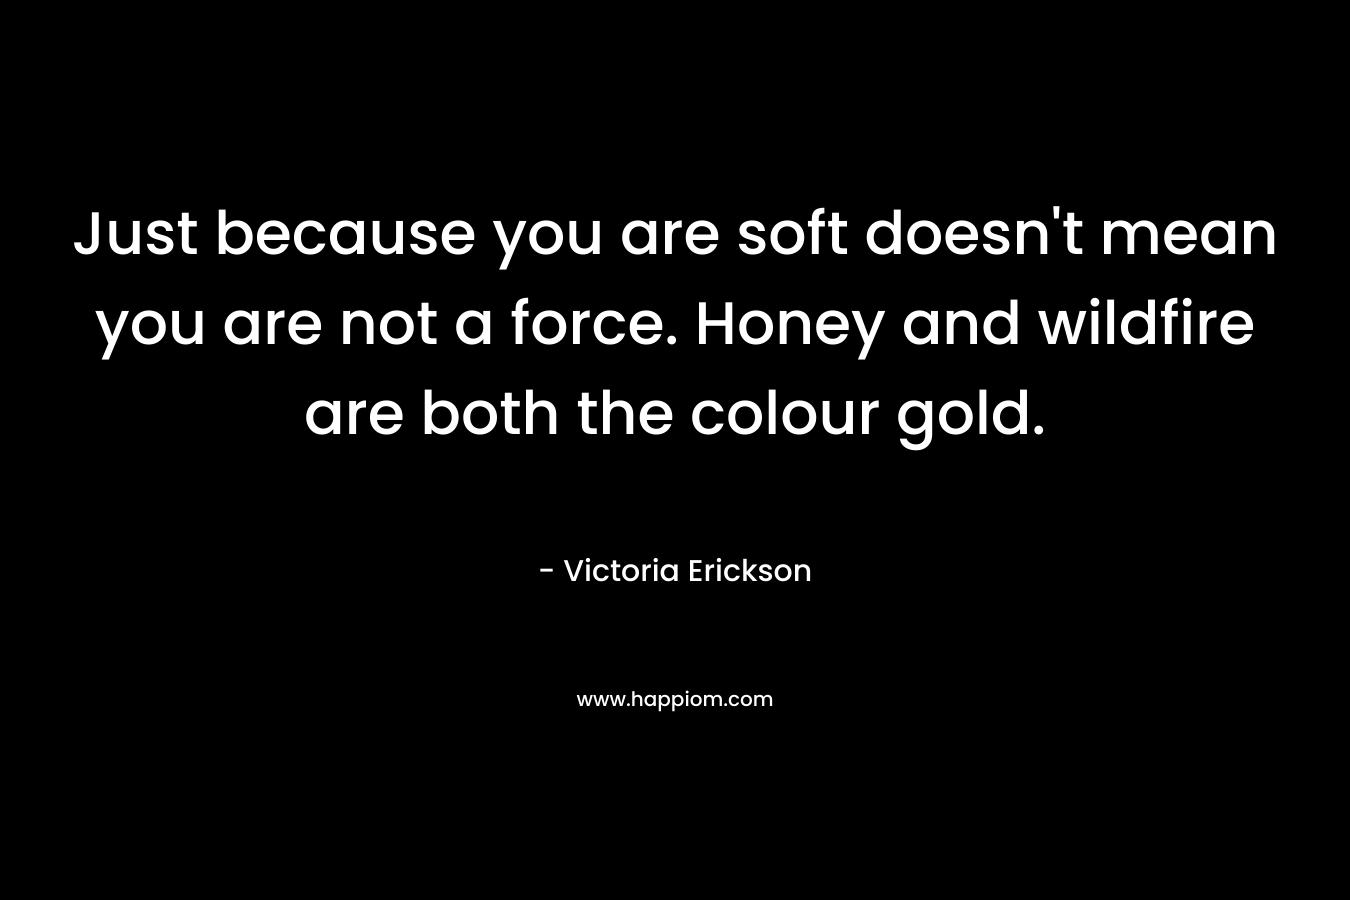 Just because you are soft doesn’t mean you are not a force. Honey and wildfire are both the colour gold. – Victoria Erickson